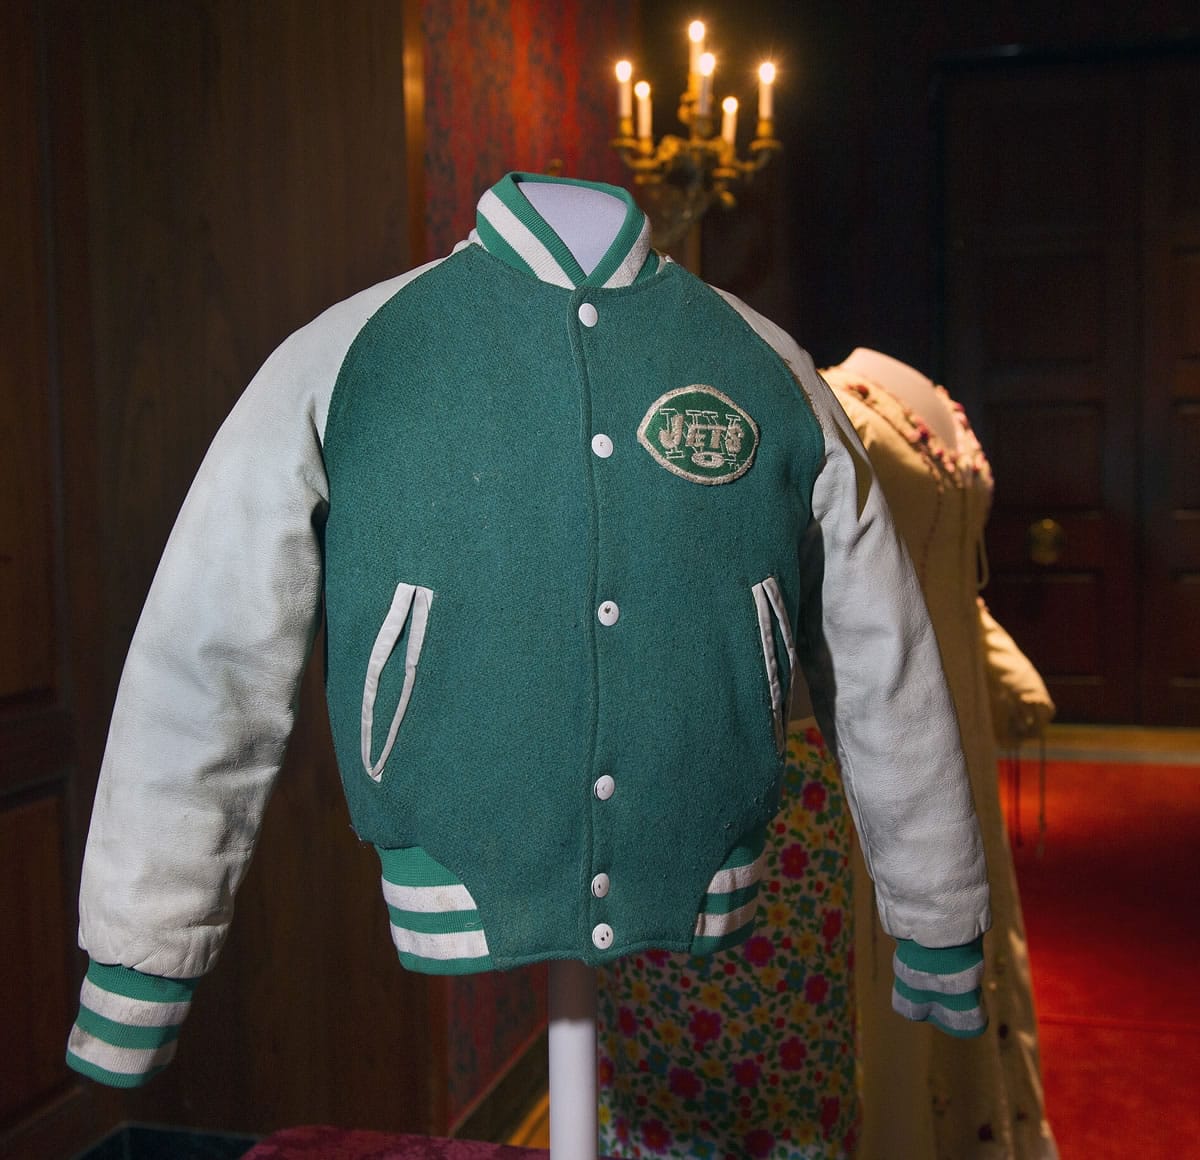 The iconic New York Jets jacket worn by actor Fred Savage in the award-winning TV series &quot;The Wonder Years&quot; is displayed during a ceremony Tuesday to donate show memorabilia to the Smithsonian's National Museum of American History in Washington.